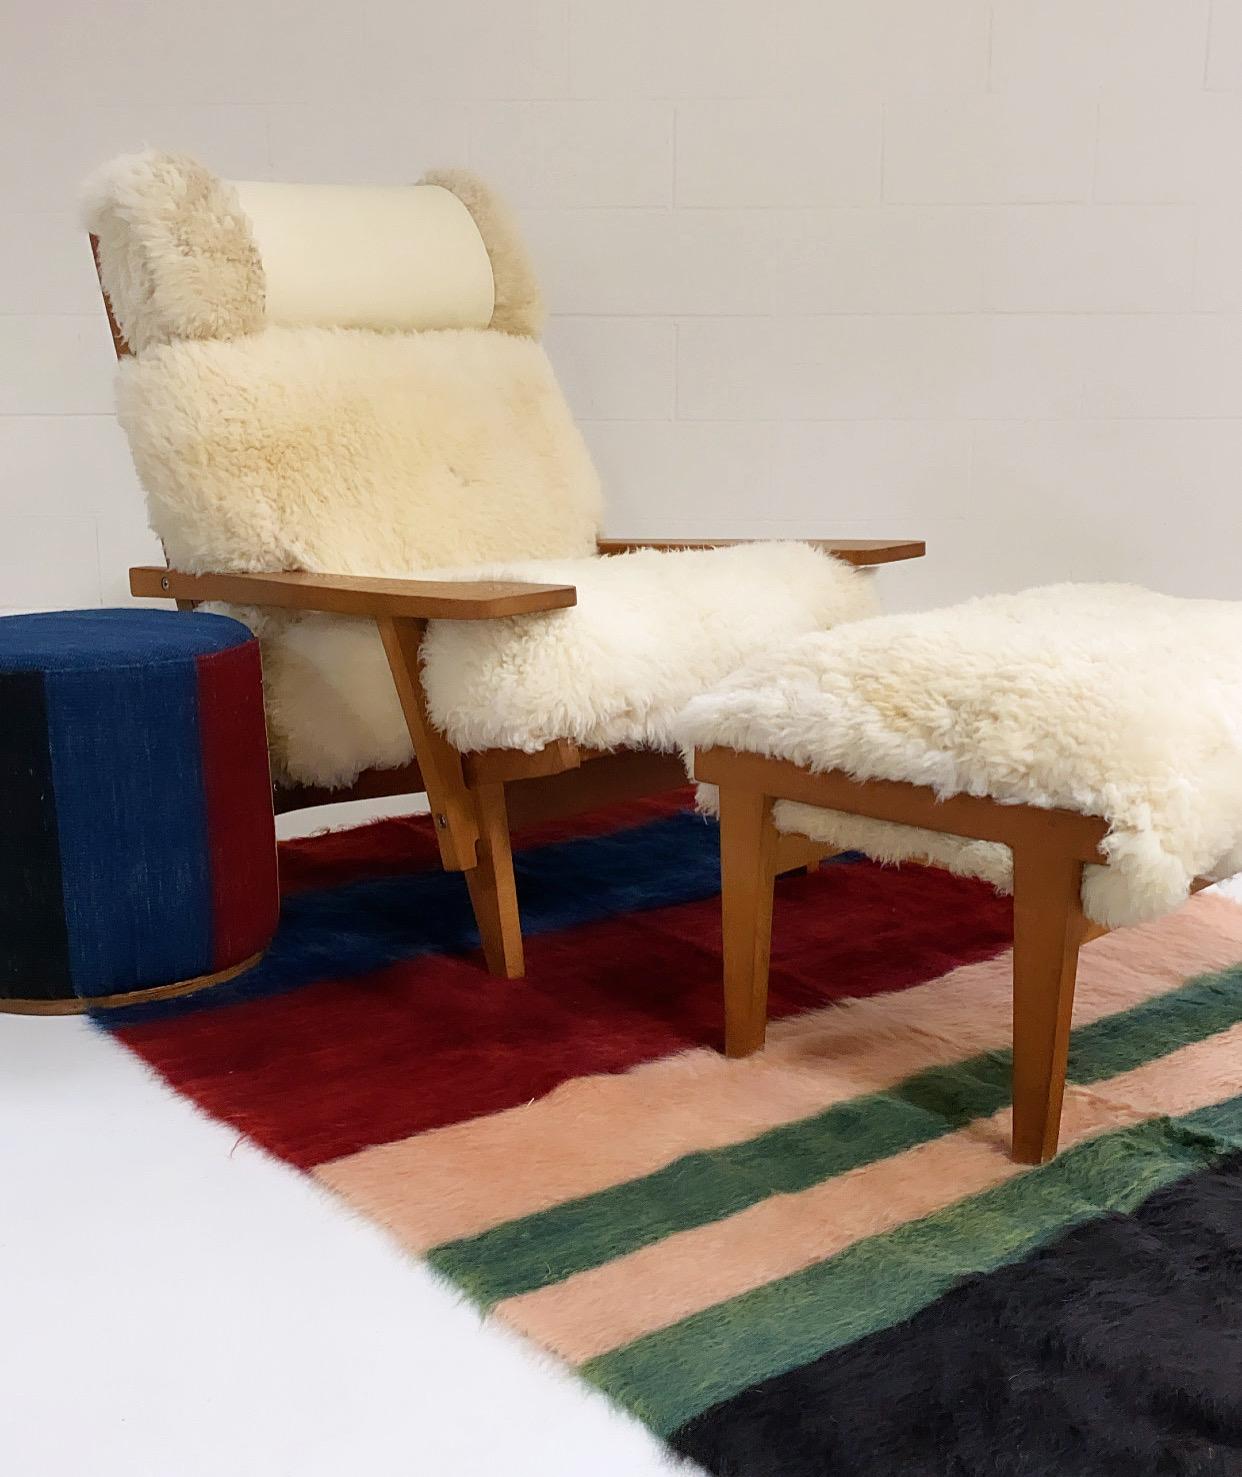 With gorgeous patinaed oak, custom California sheepskin cushions, and a finishing touch of beautiful ivory leather, this Hans Wegner lounge and ottoman set is incredible. The Model GE 375 Chair is nicknamed the 